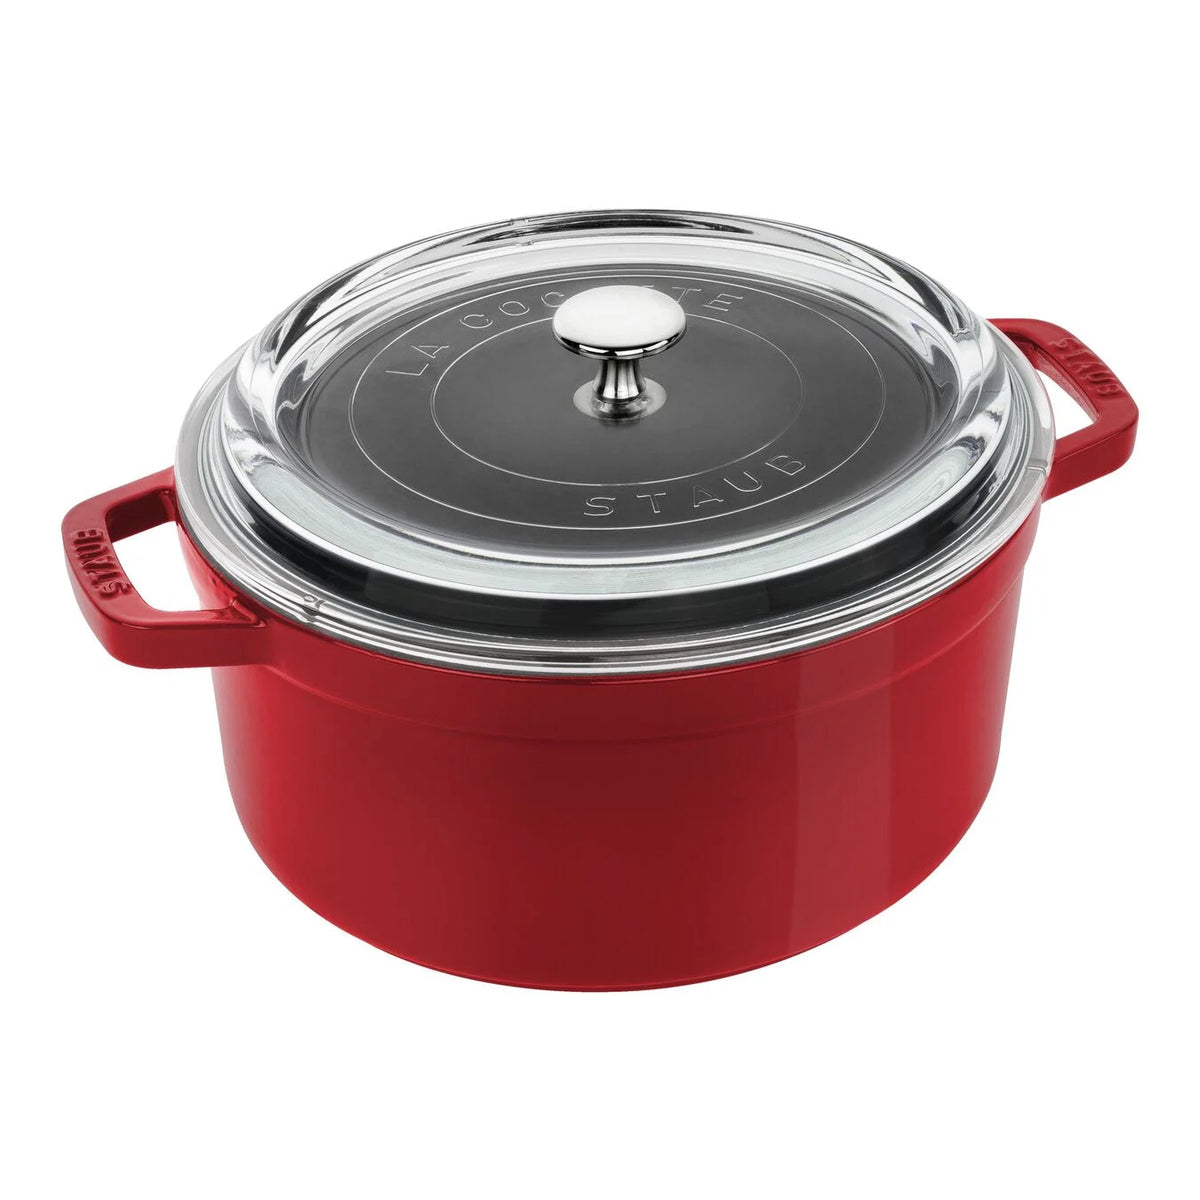 STAUB Round Cocotte with Glass Lid 4 qt. / 3.8L